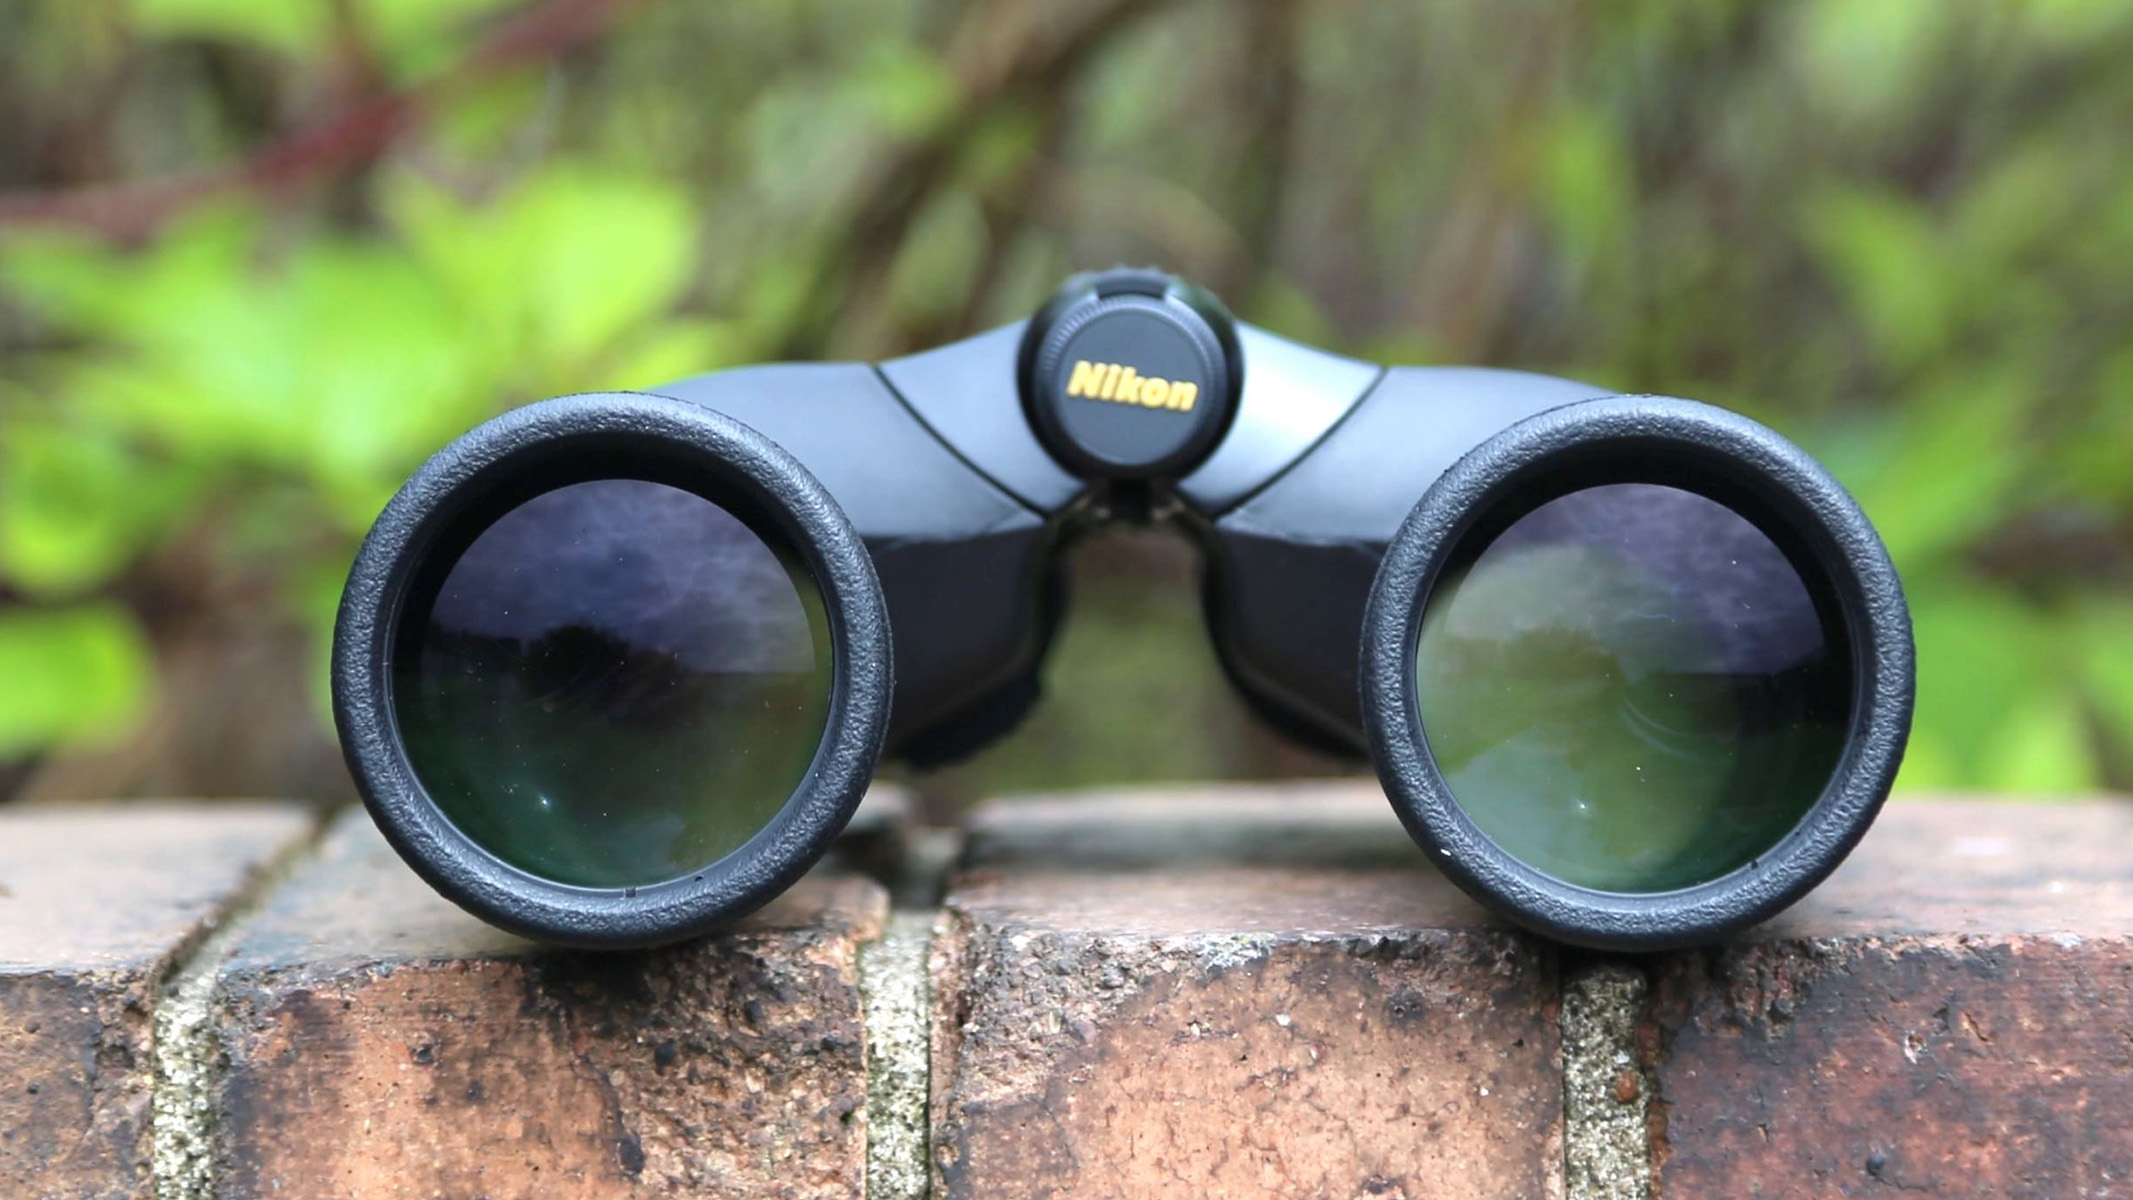 A front on view of the Nikon Action EX 12 x 50 binoculars